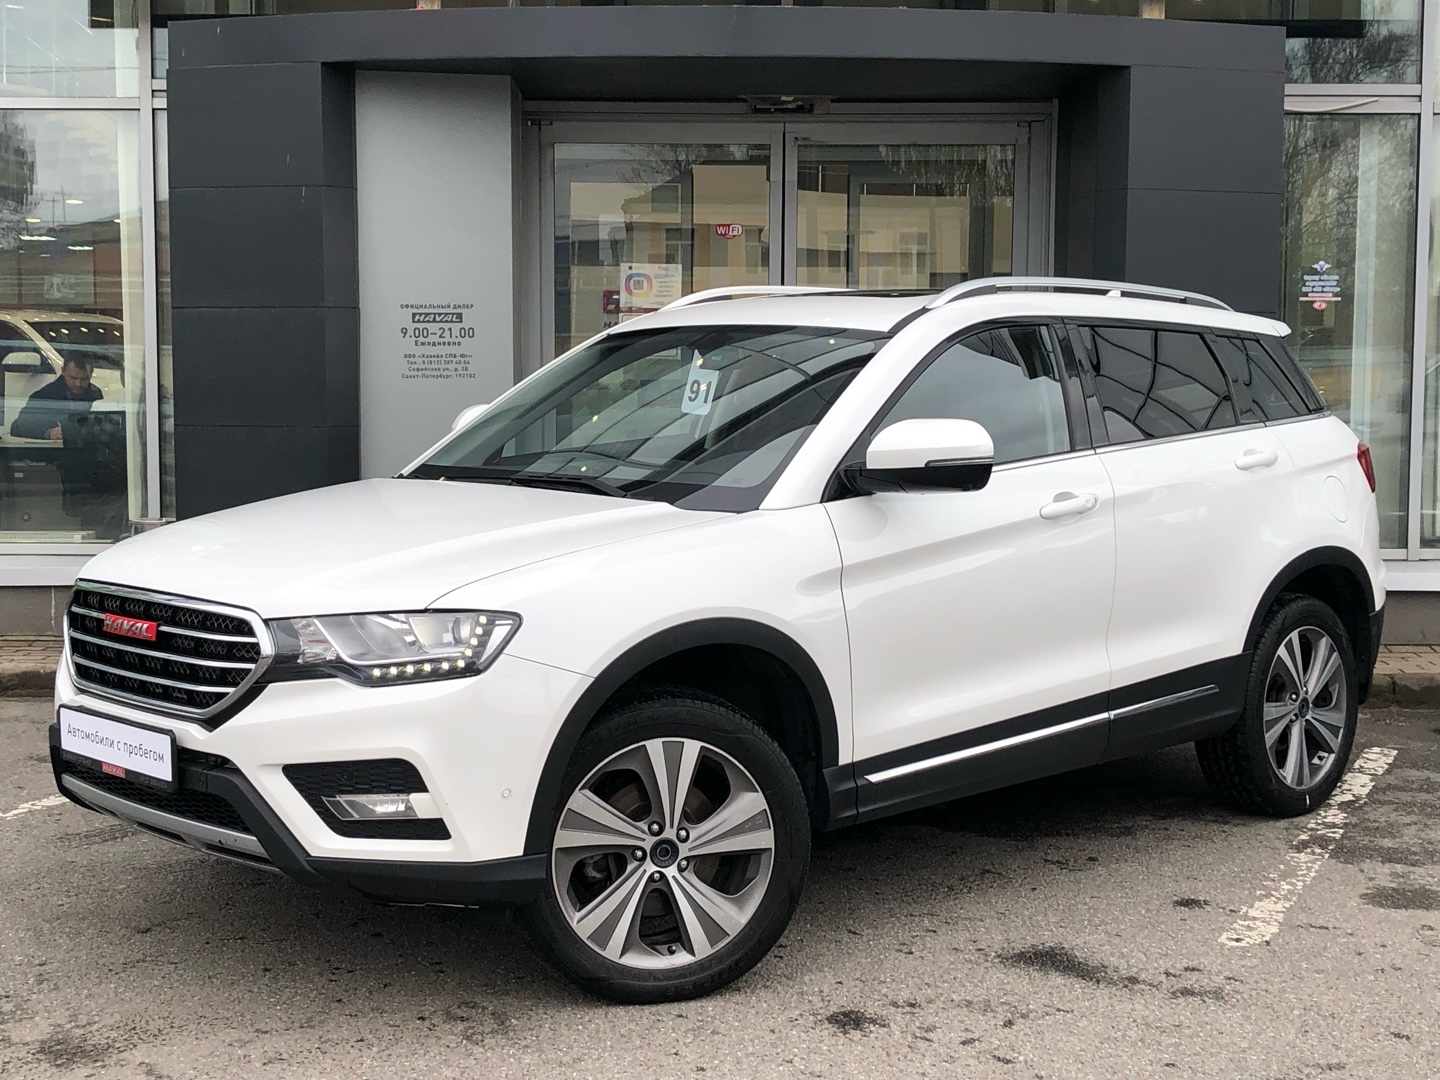 Haval H6 Coupe, 2018, VIN: LGWEF6A54JH901710